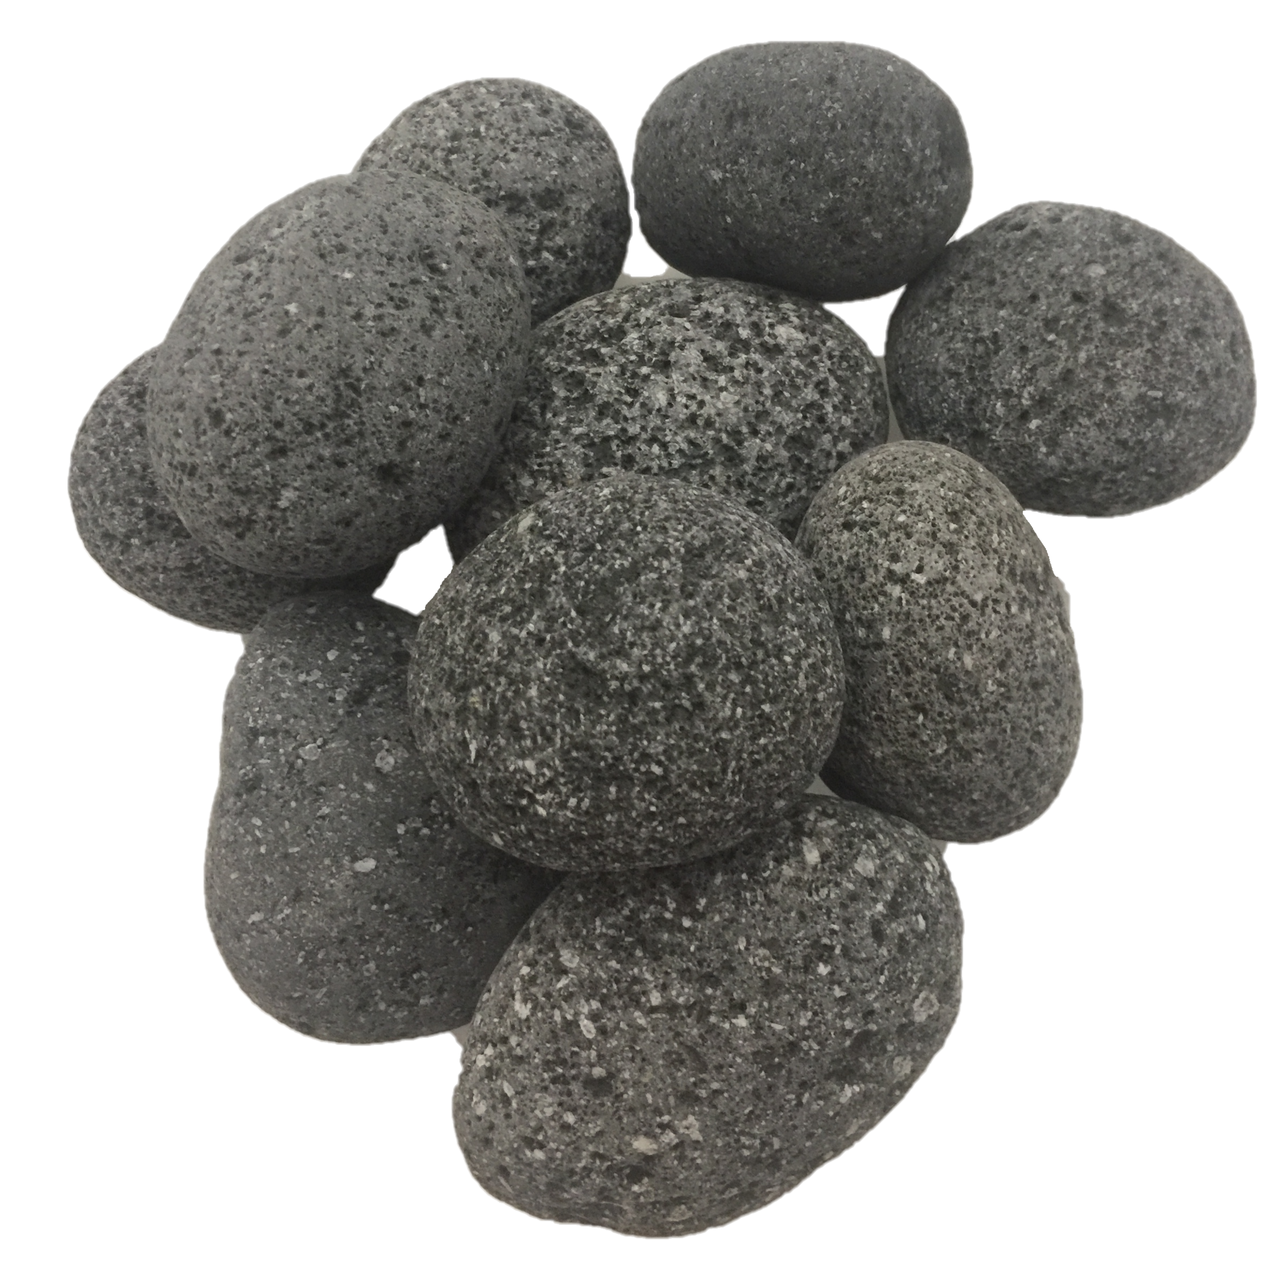 PAPOOSE Open Ended - Loose Parts - Lava Volcanic Rocks - 10 Piece